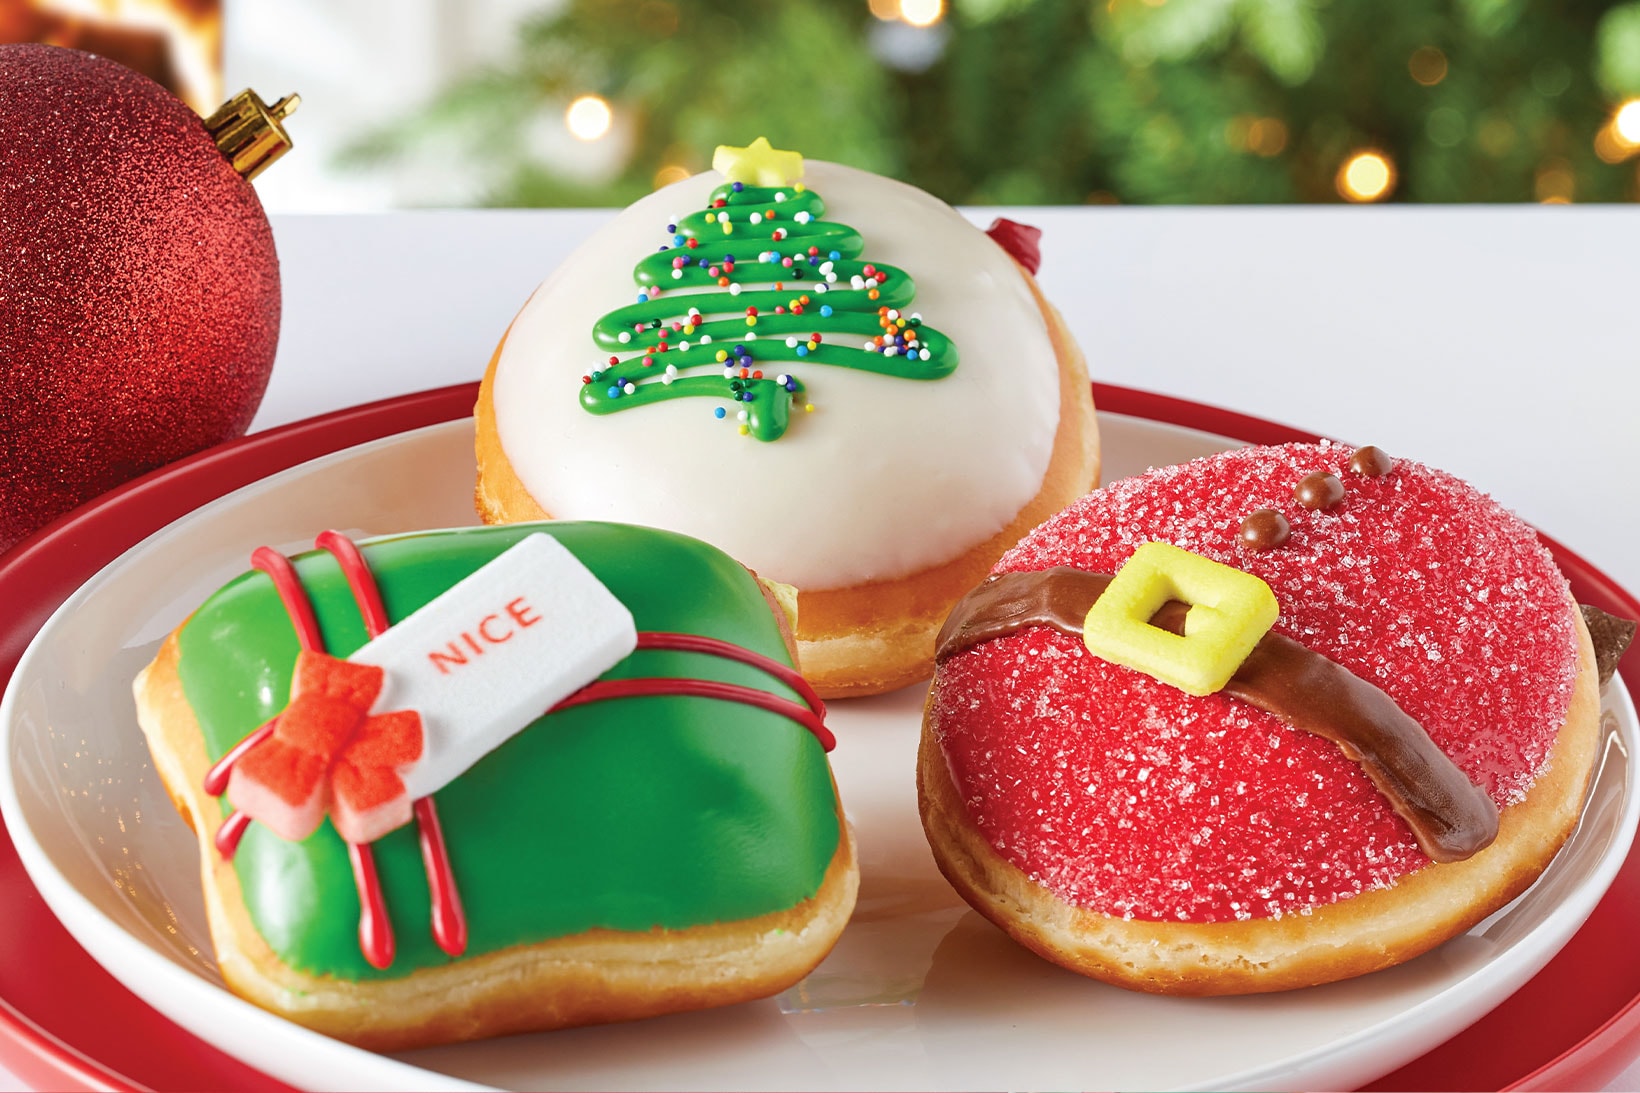 krispy kreme christmas holiday nicest doughnut collection santa belly festive tree free donuts delivery drivers